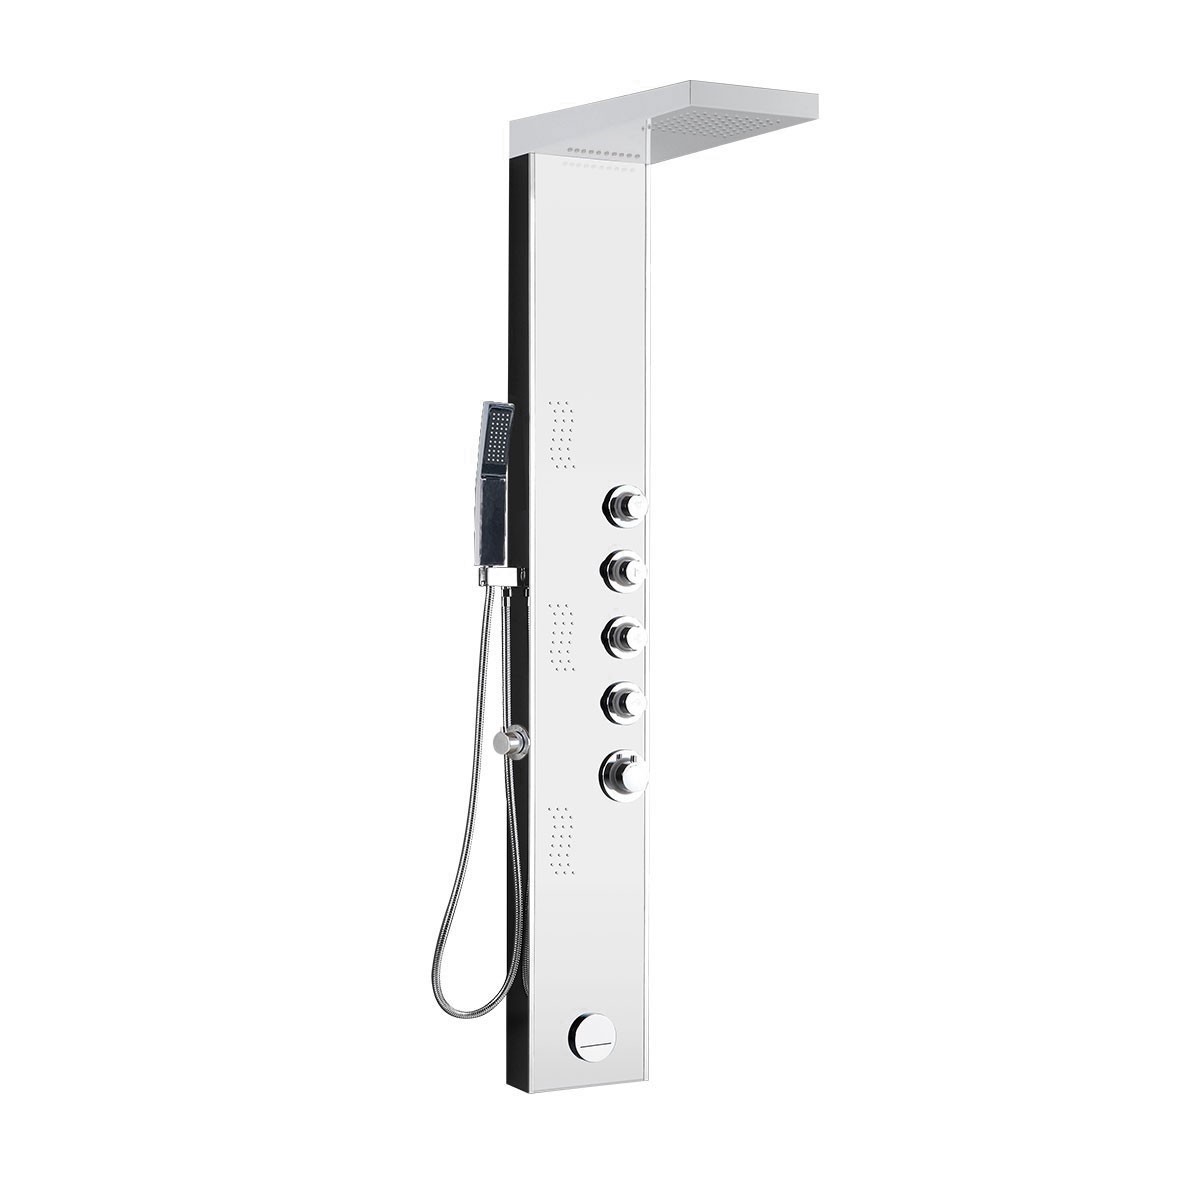 White Stainless Steel Thermostatic LED Shower Panel System (LYB-5518-BL)